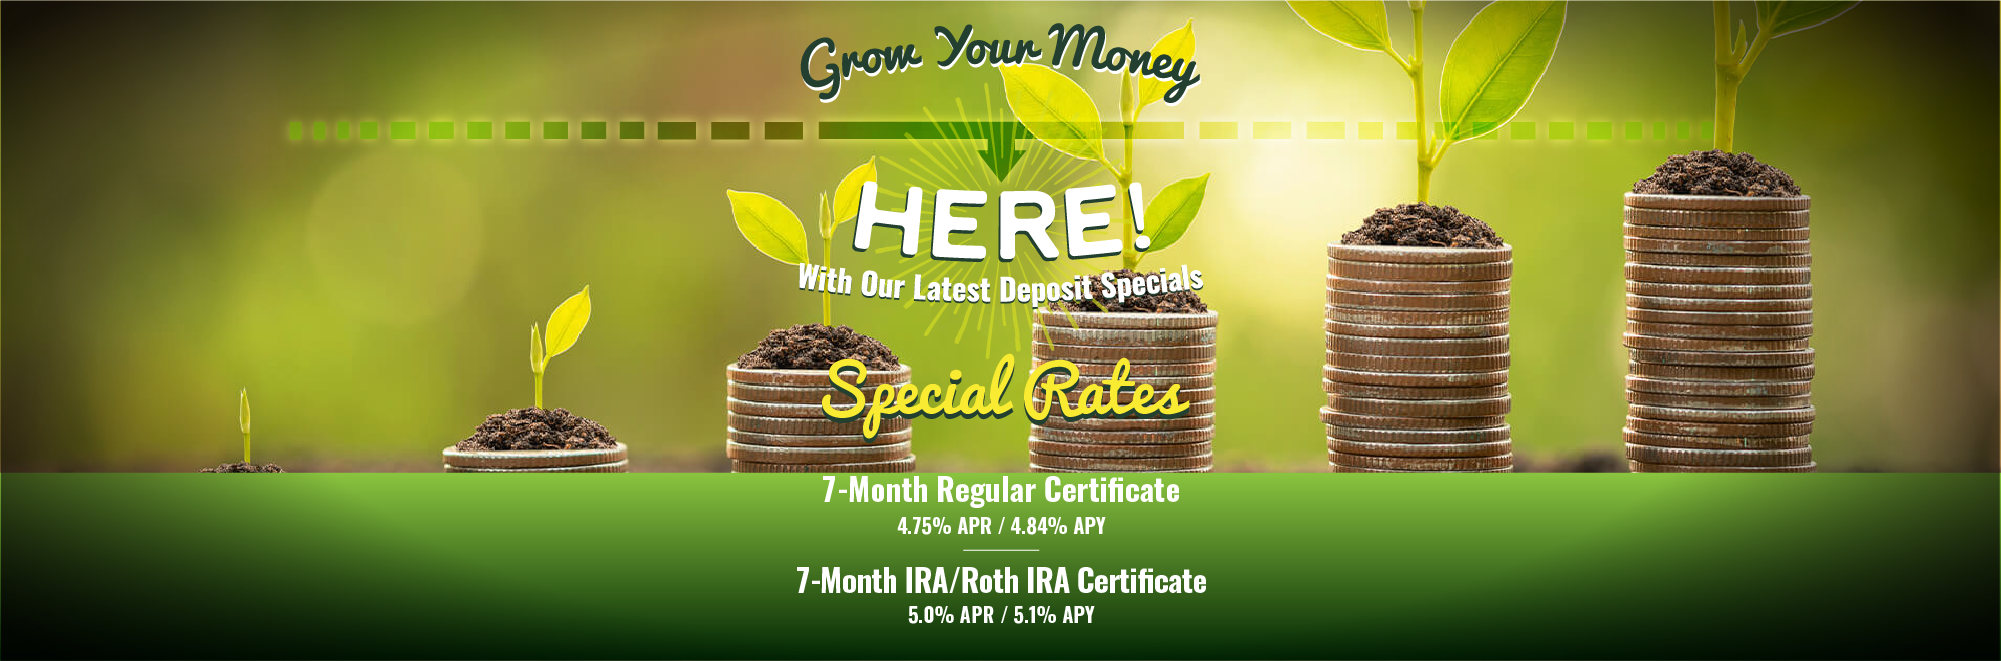 Grow your money here. With our latest deposit specials. 7-Month Regular Certificate 7-Month IRA/Roth IRA Certificate 5.0% APR / 5.1% APY4.75% APR / 4.84% APY